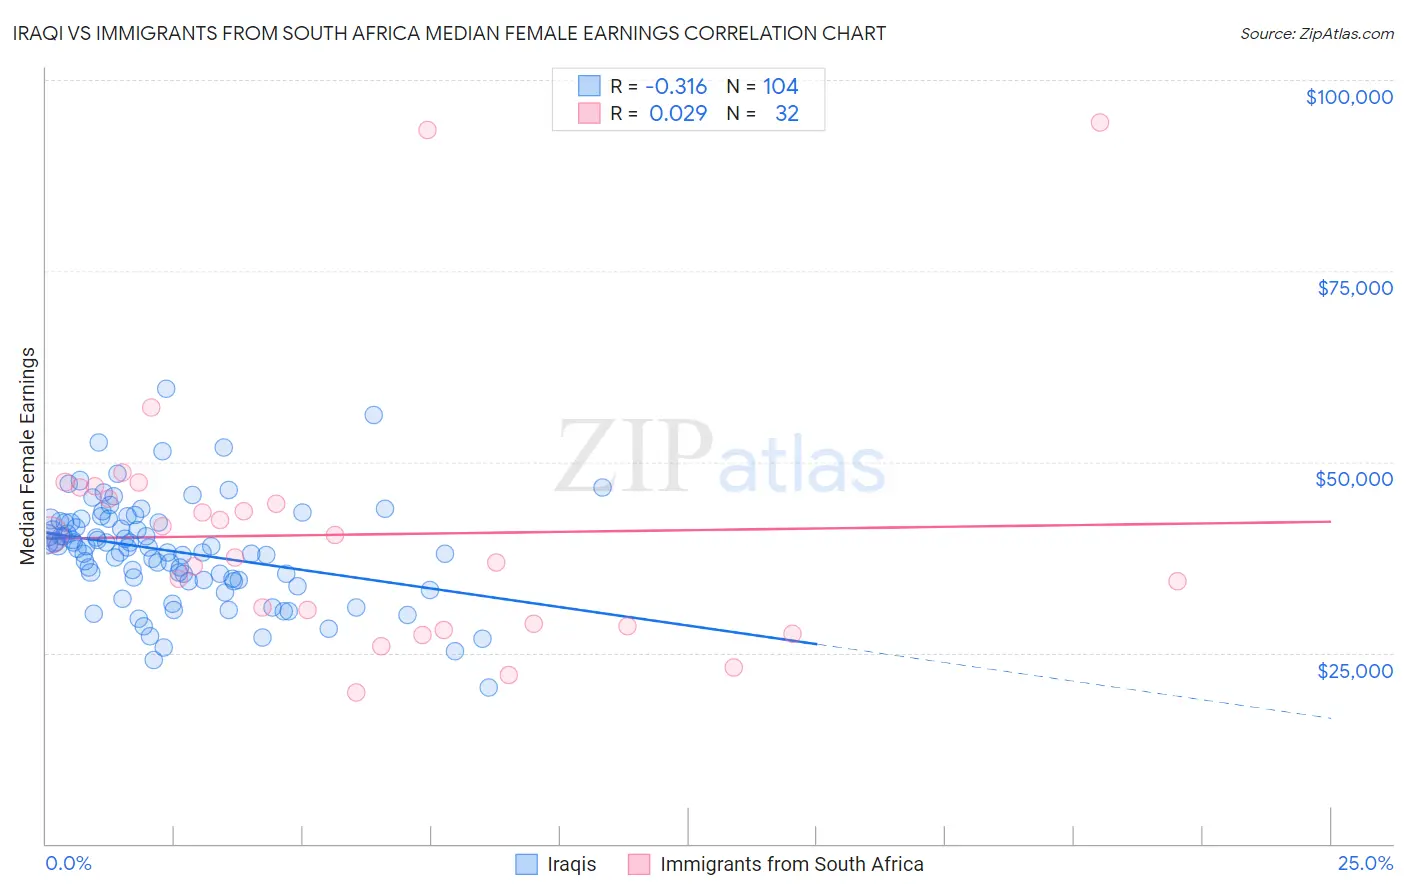 Iraqi vs Immigrants from South Africa Median Female Earnings